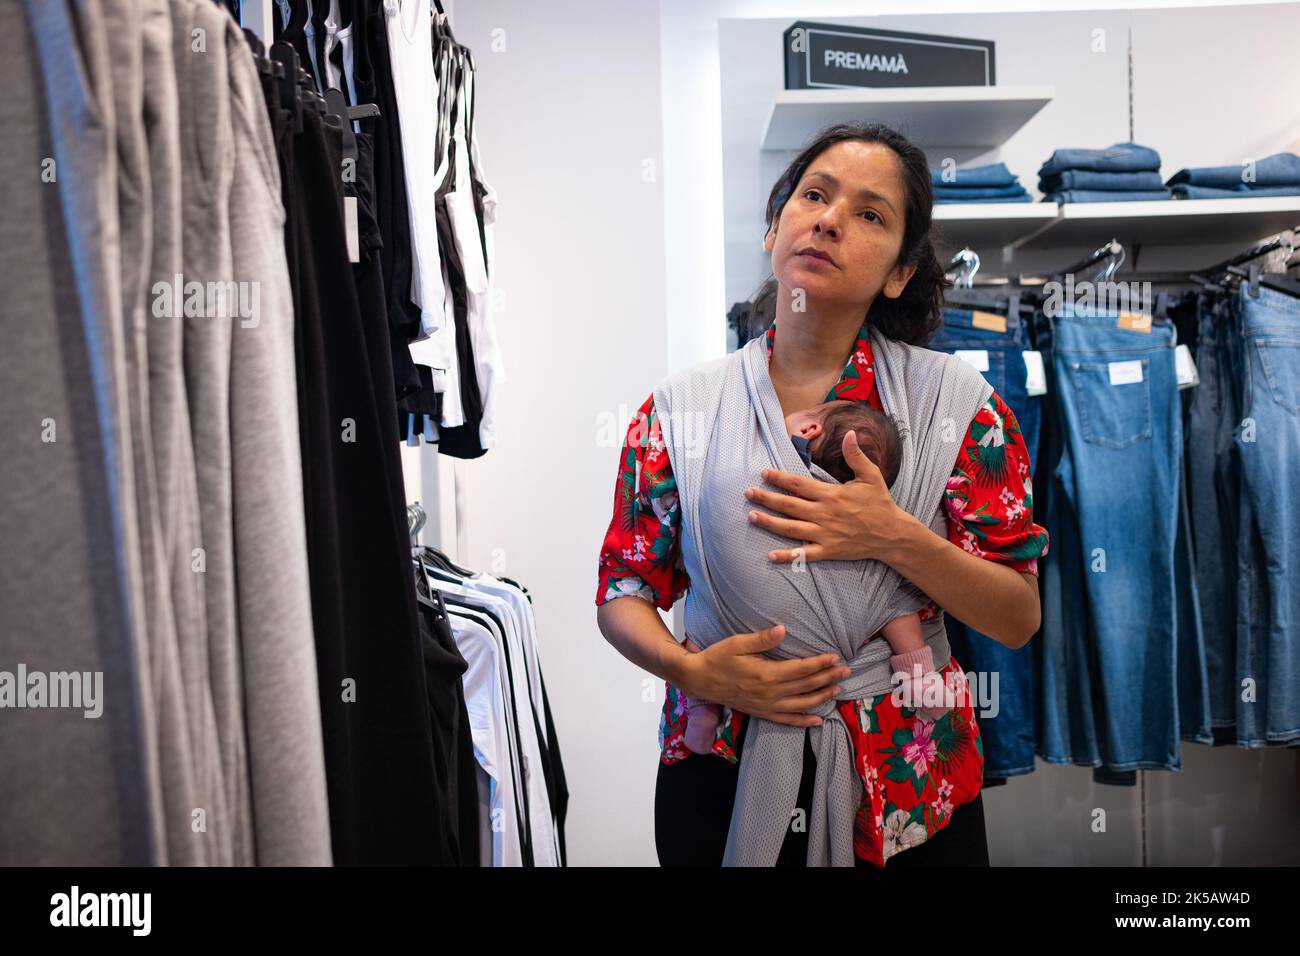 A woman carrying her kid seen shopping inside a clothing store in the ...